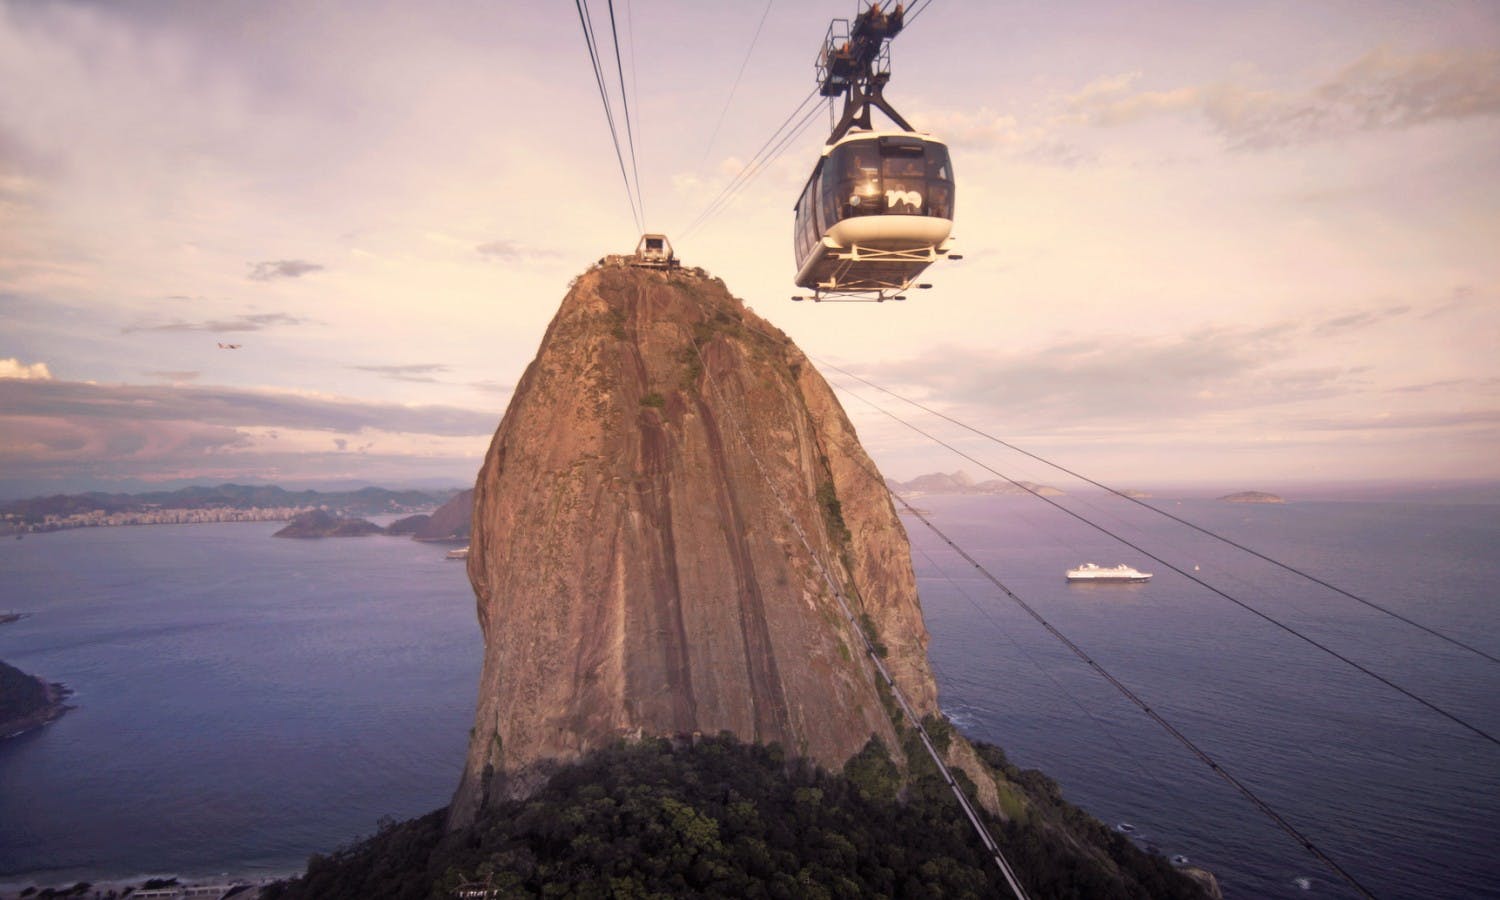 Sugar Loaf city tour and cable car from Rio